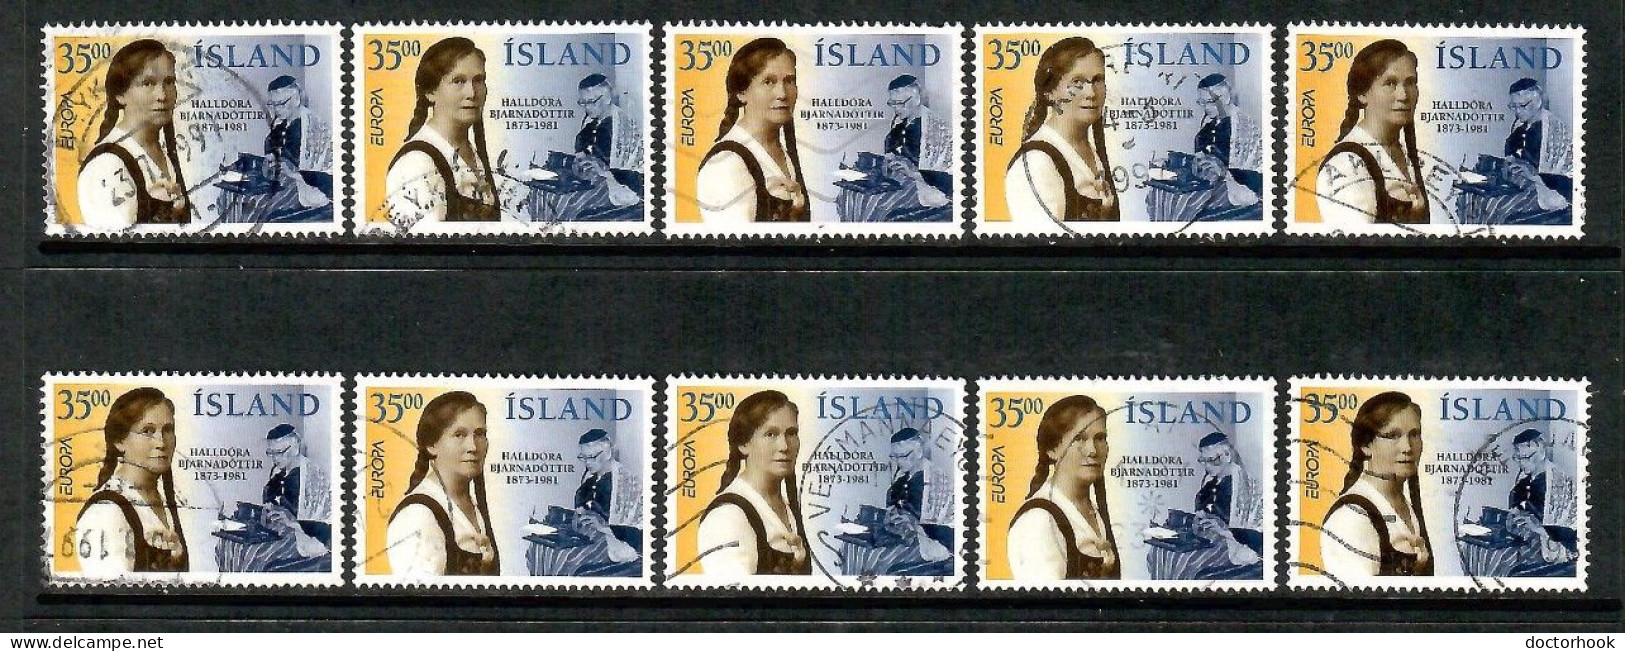 ICELAND   Scott # 818 USED WHOLESALE LOT OF 10 (CONDITION AS PER SCAN) (WH-628) - Lots & Serien